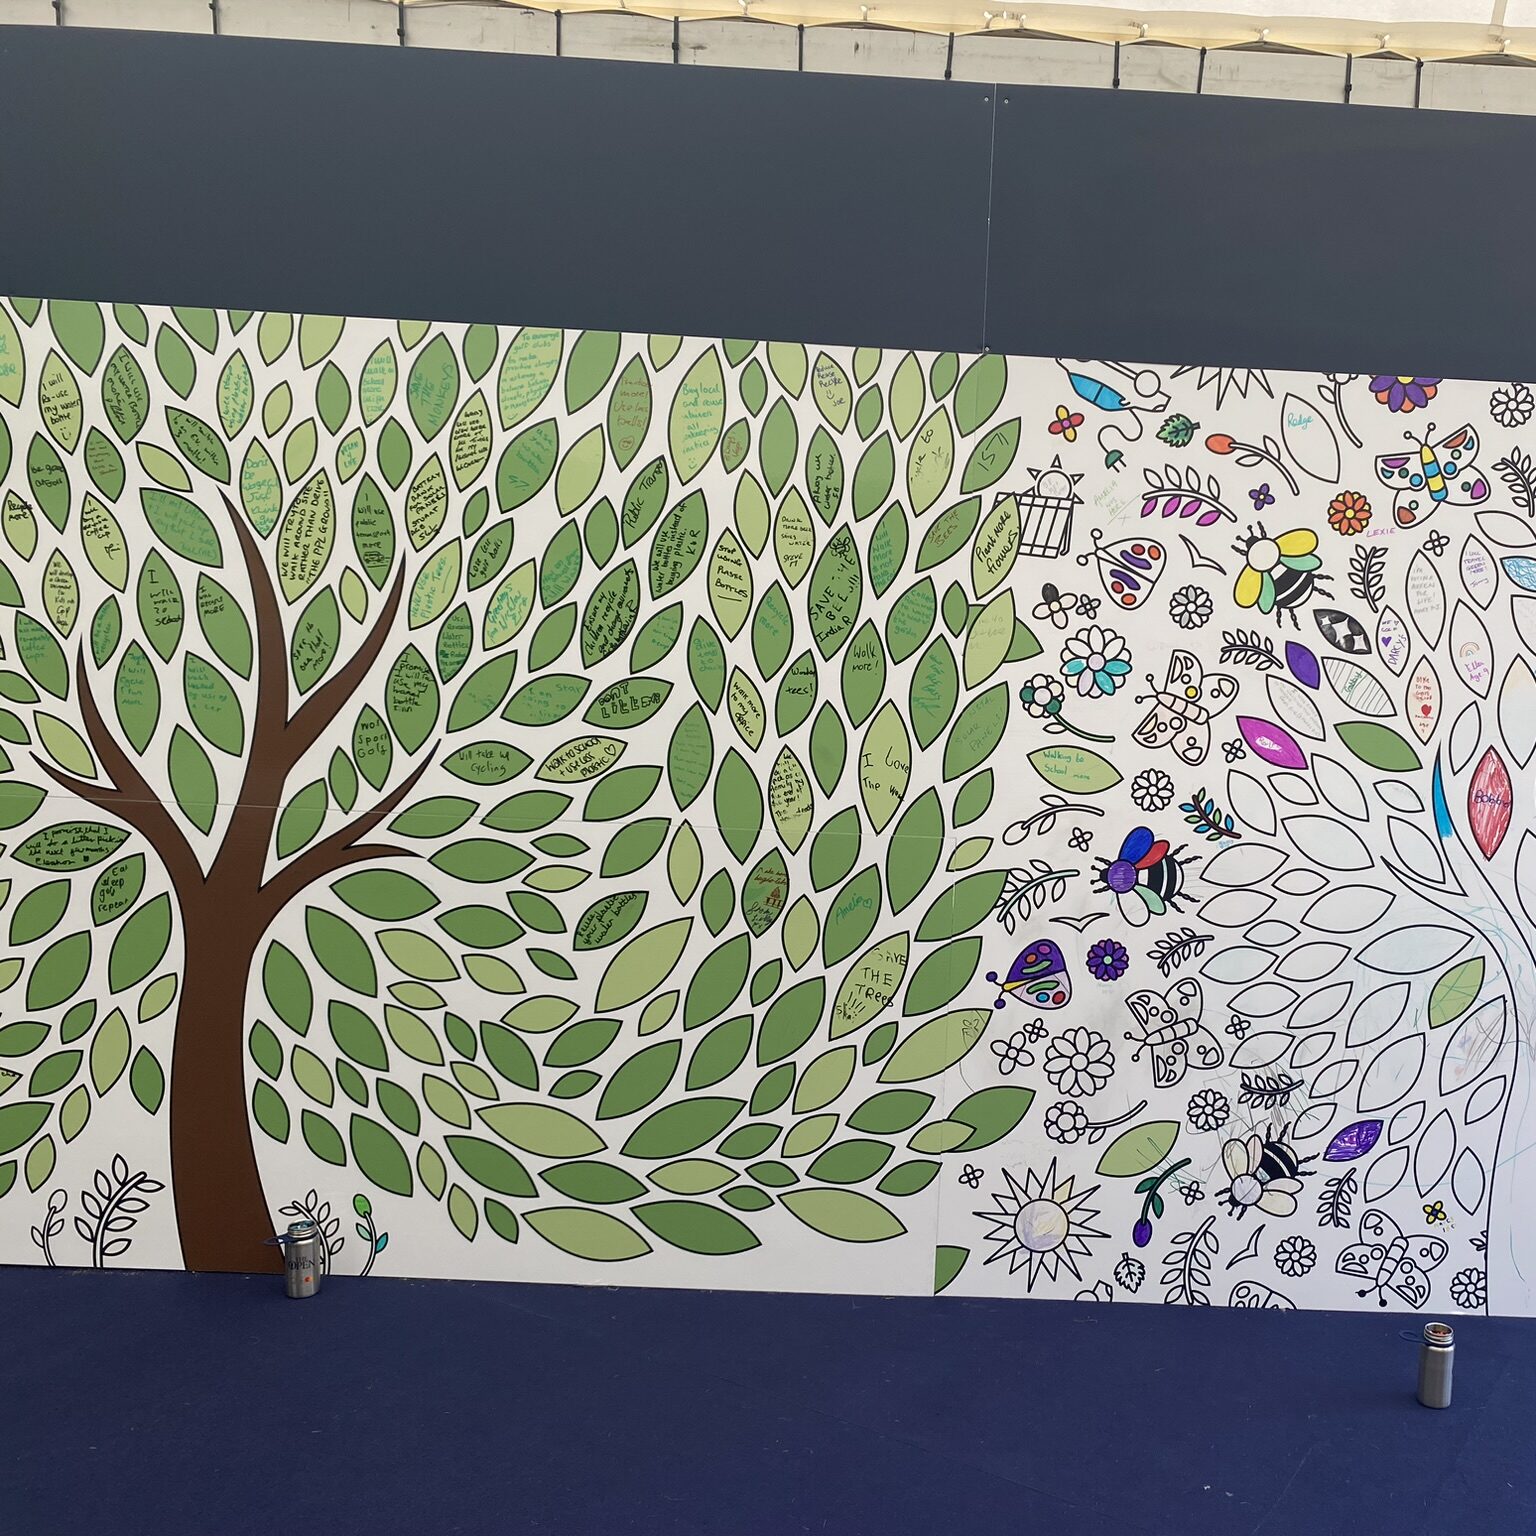 Image of a tree mural in the sustainable tent created by PPL Group for the 151st The Open.